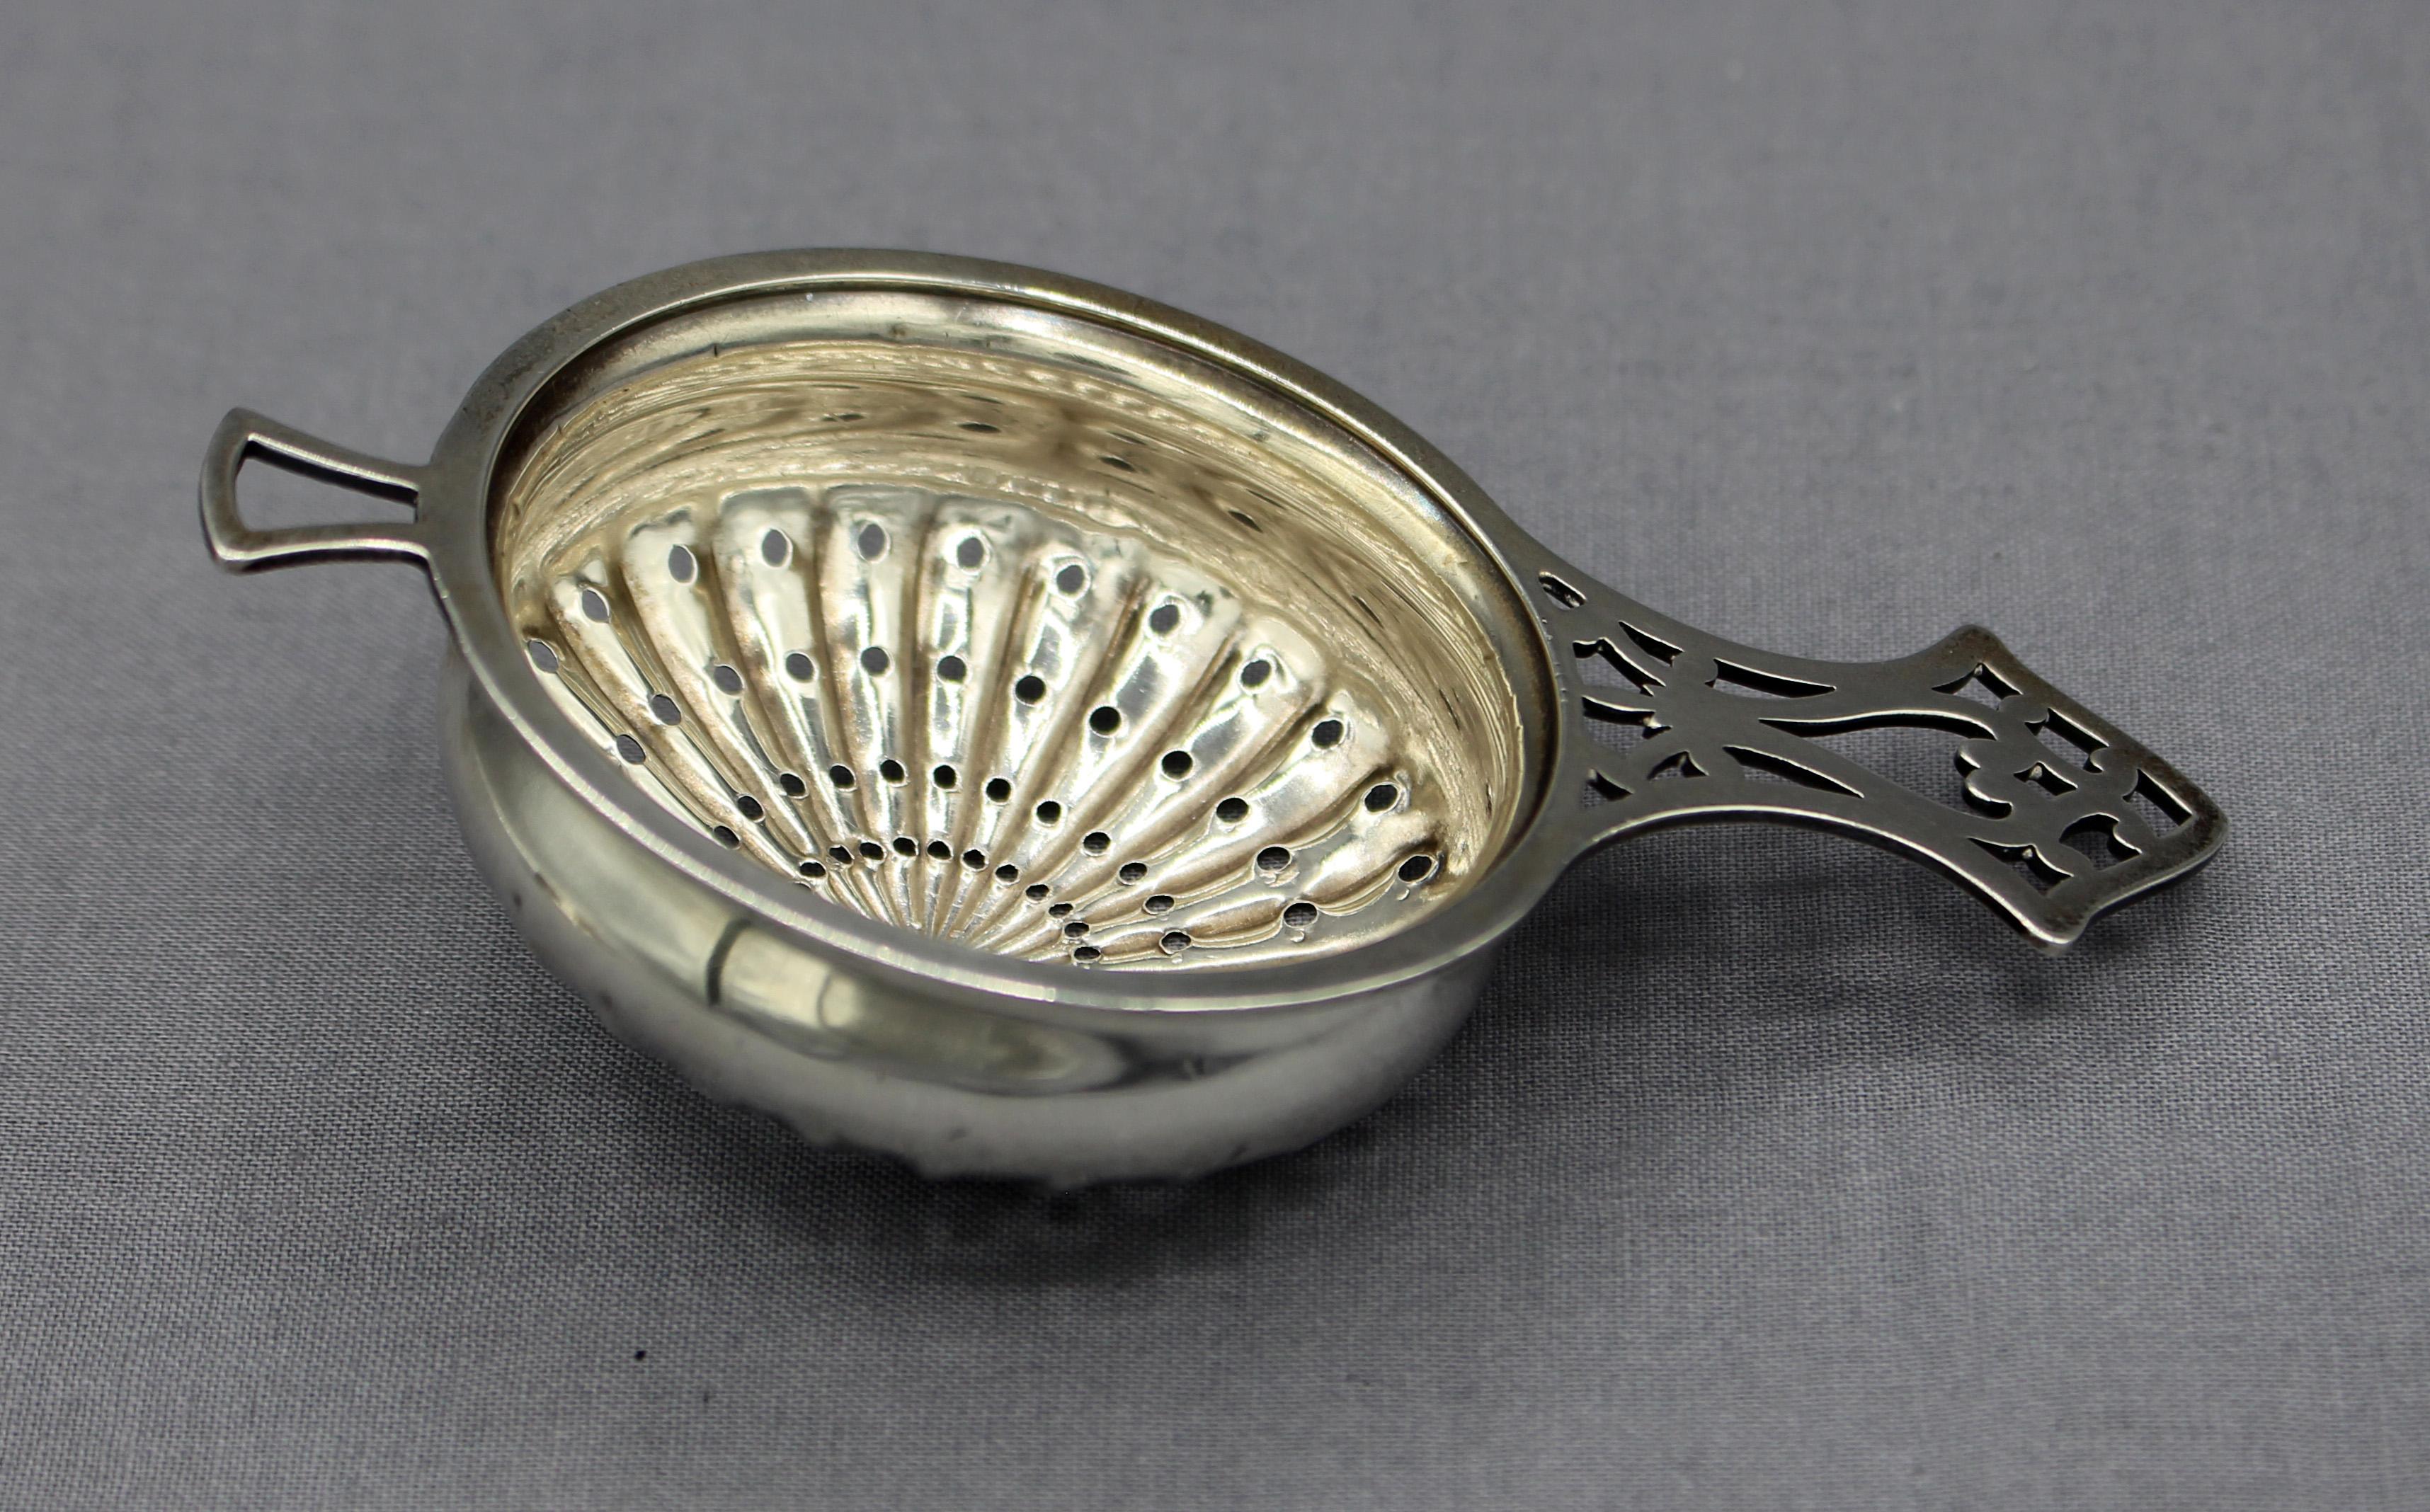 Sterling silver tea strainer with silver plated stand, American & English, c.1890-1920. The strainer is American sterling silver while the stand is English silverplate by Webster. Pierced handle & conforming pierced stand.
Overall: 3